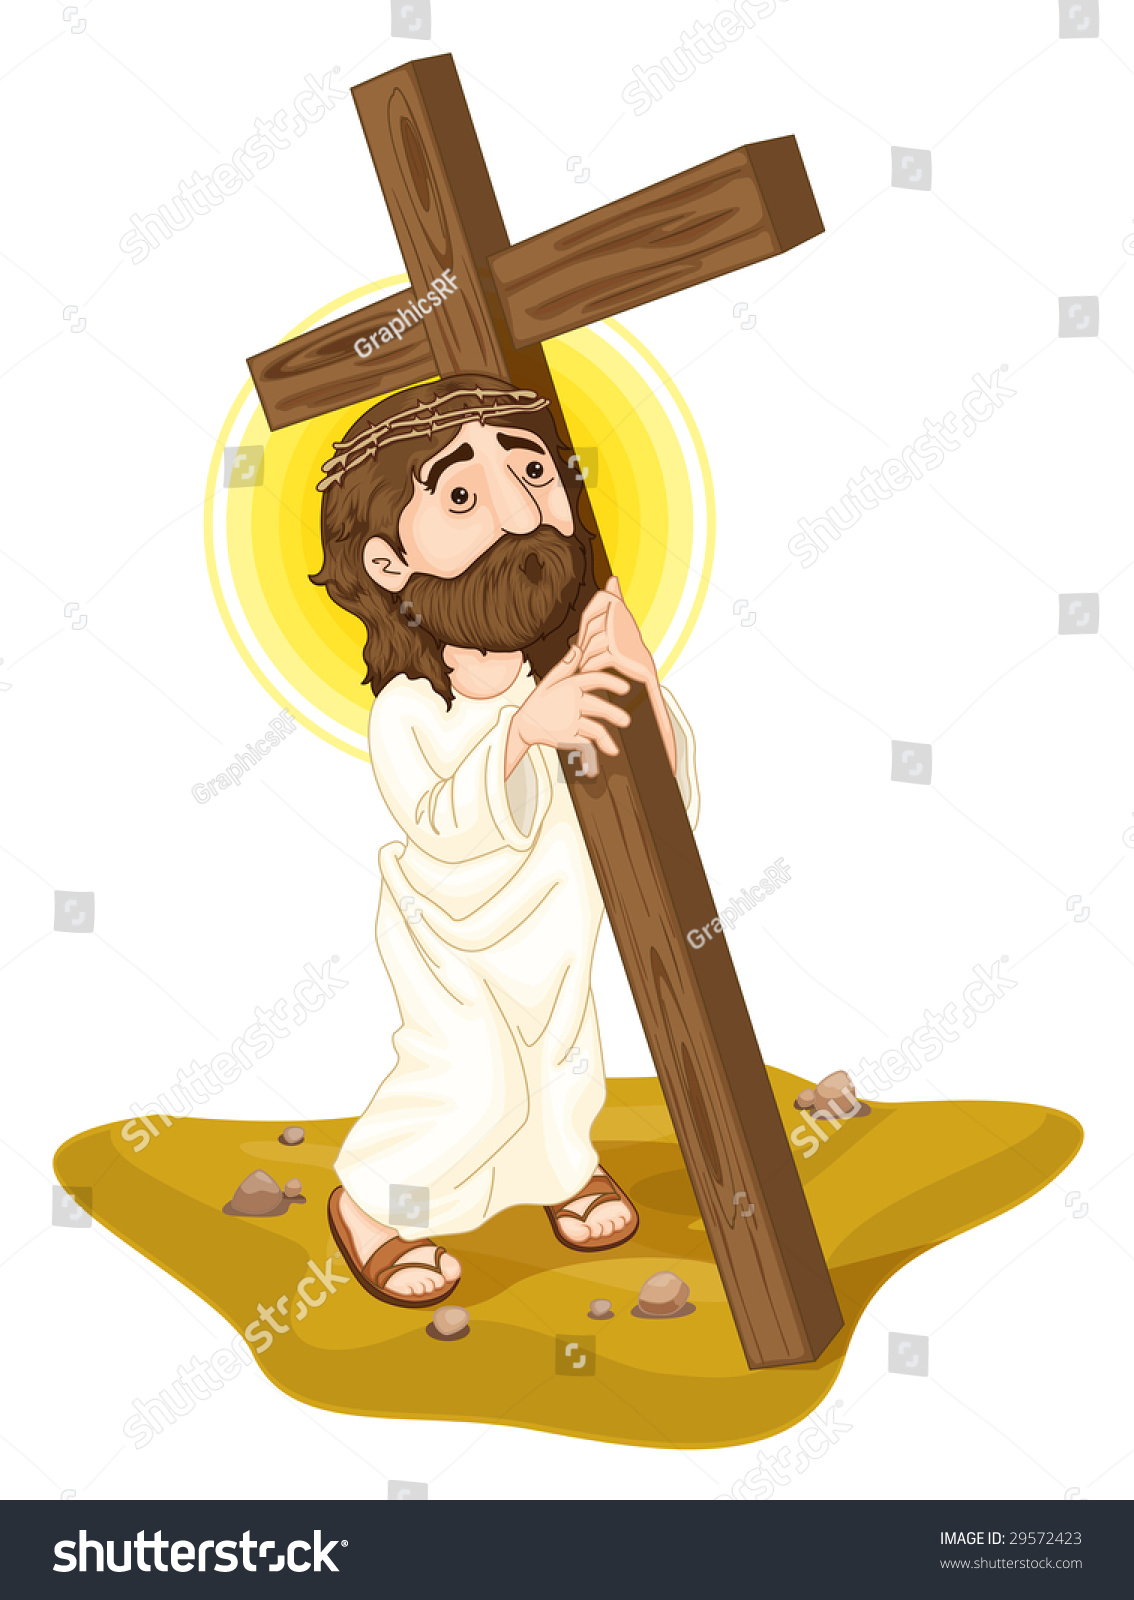 free clipart jesus carrying cross - photo #22